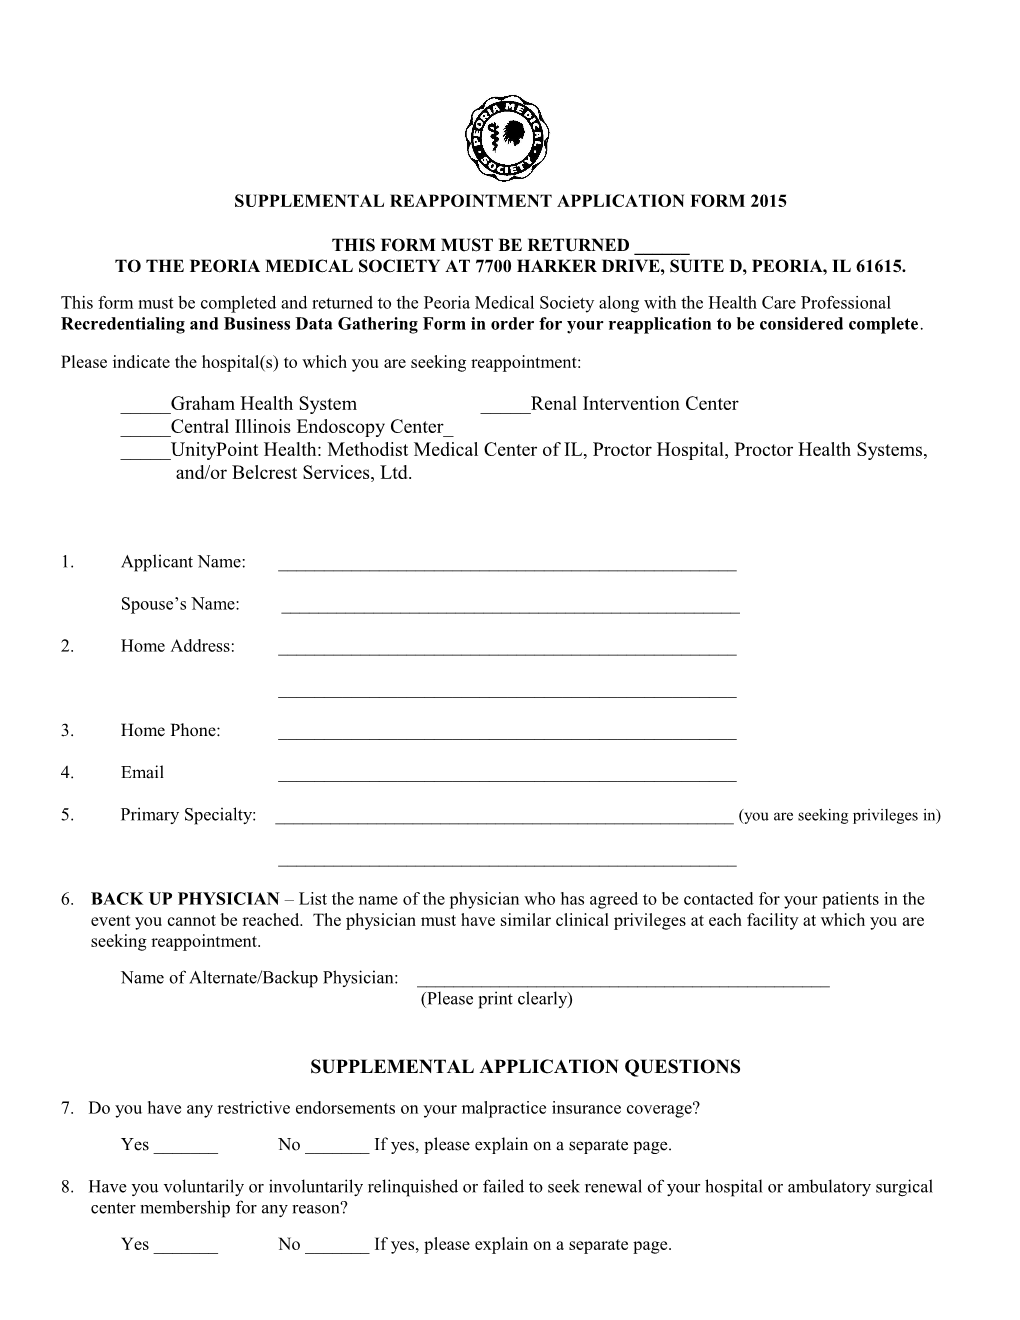 Supplemental Reappointment Application Form 2007-2008